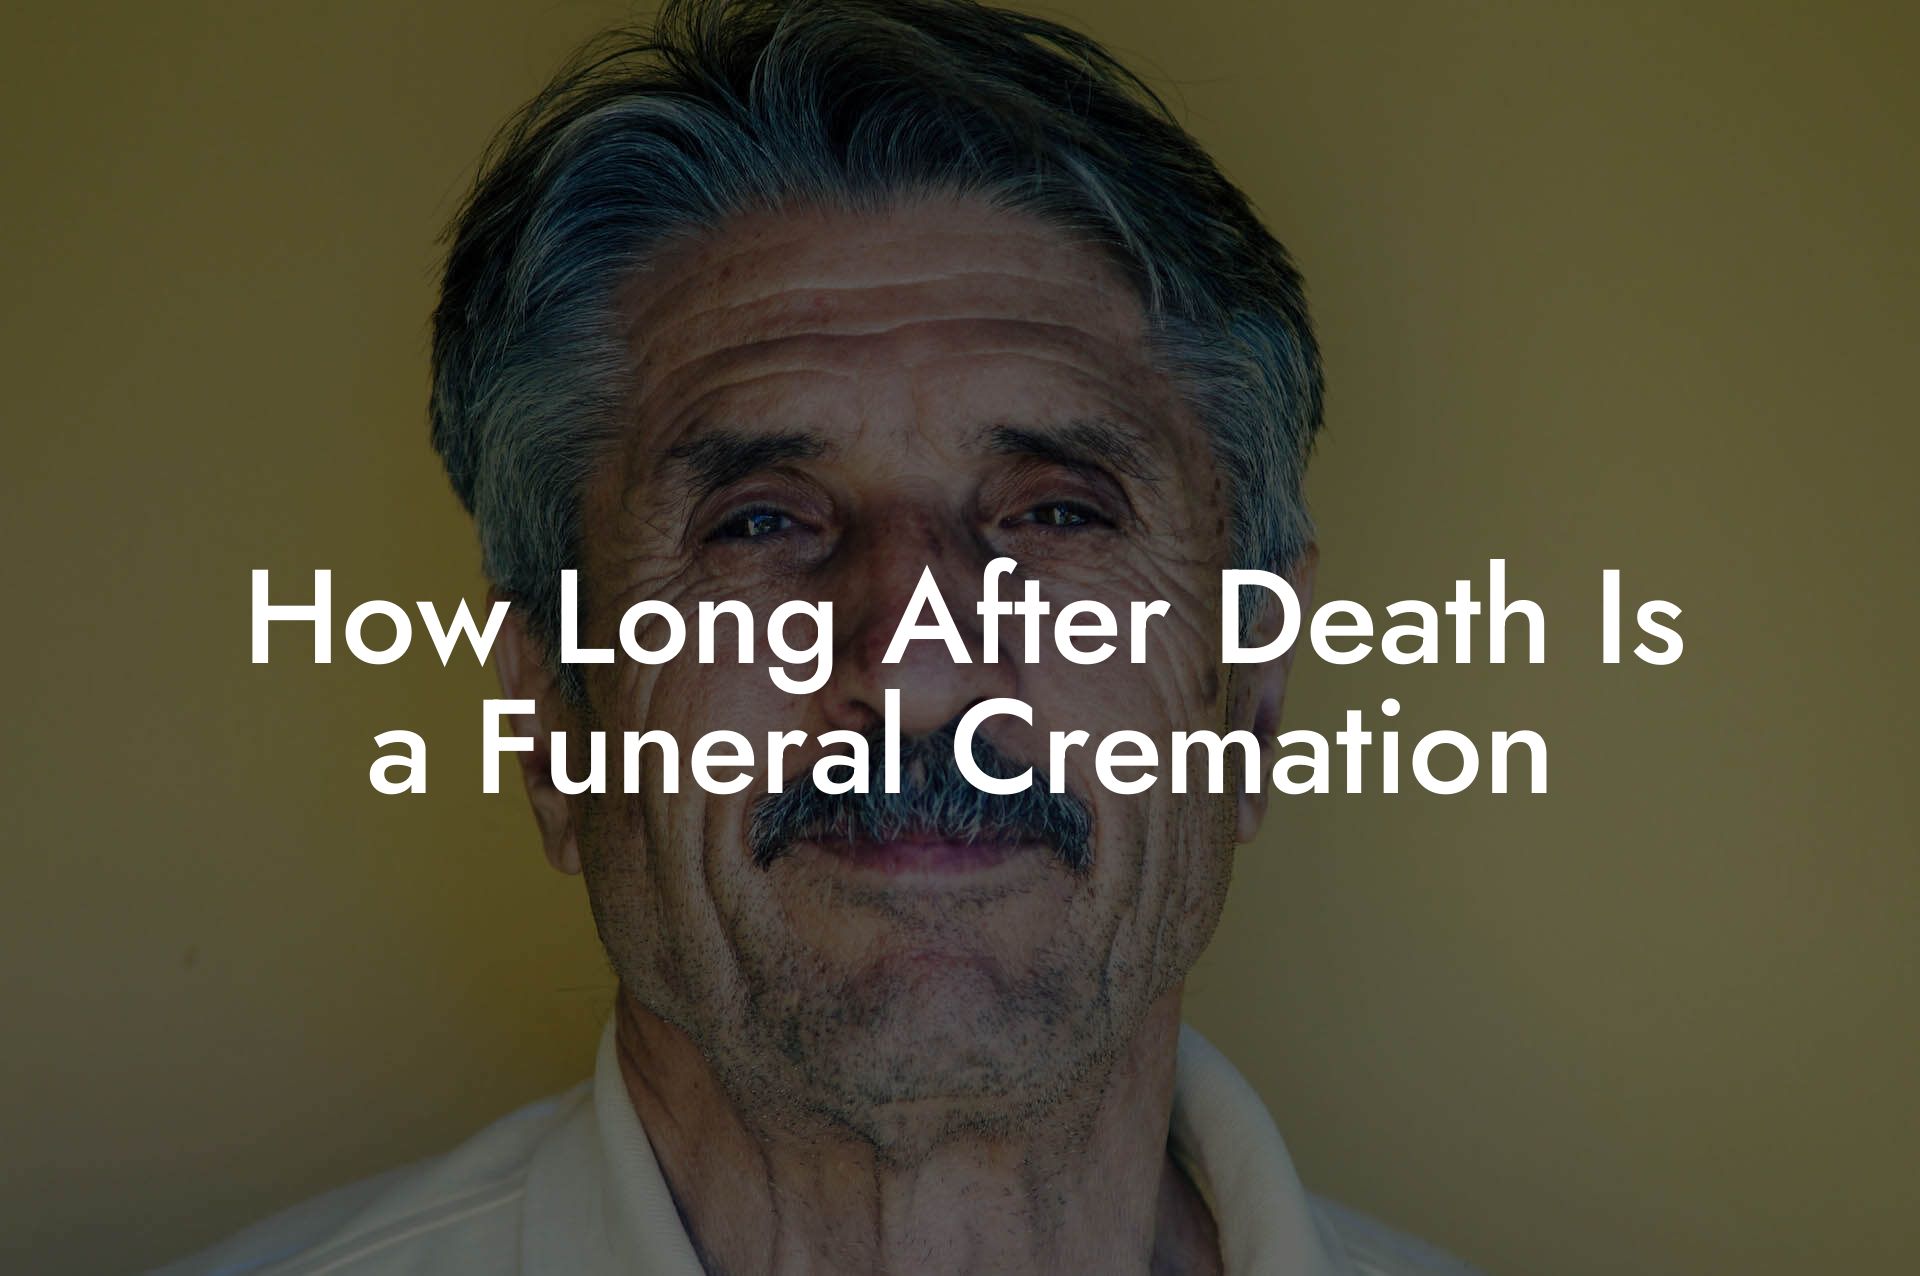 How Long After Death Is a Funeral Cremation